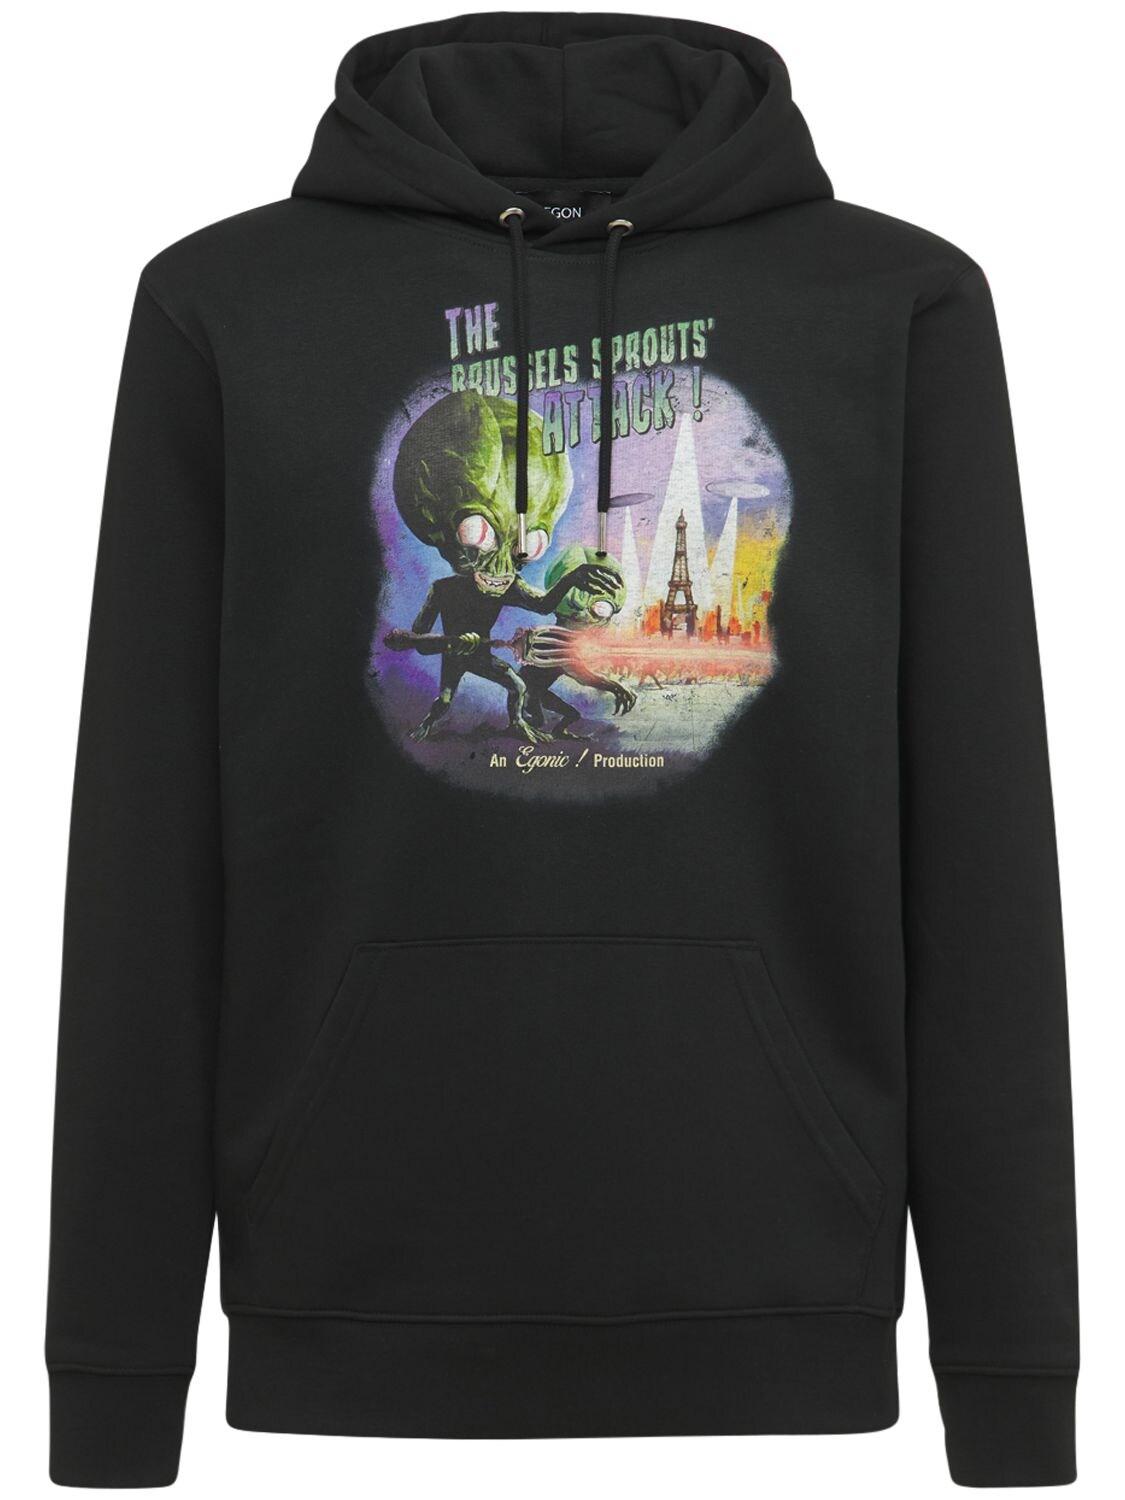 Egonlab The Brussels Sprout's Attack! Hoodie in Black for Men - Lyst